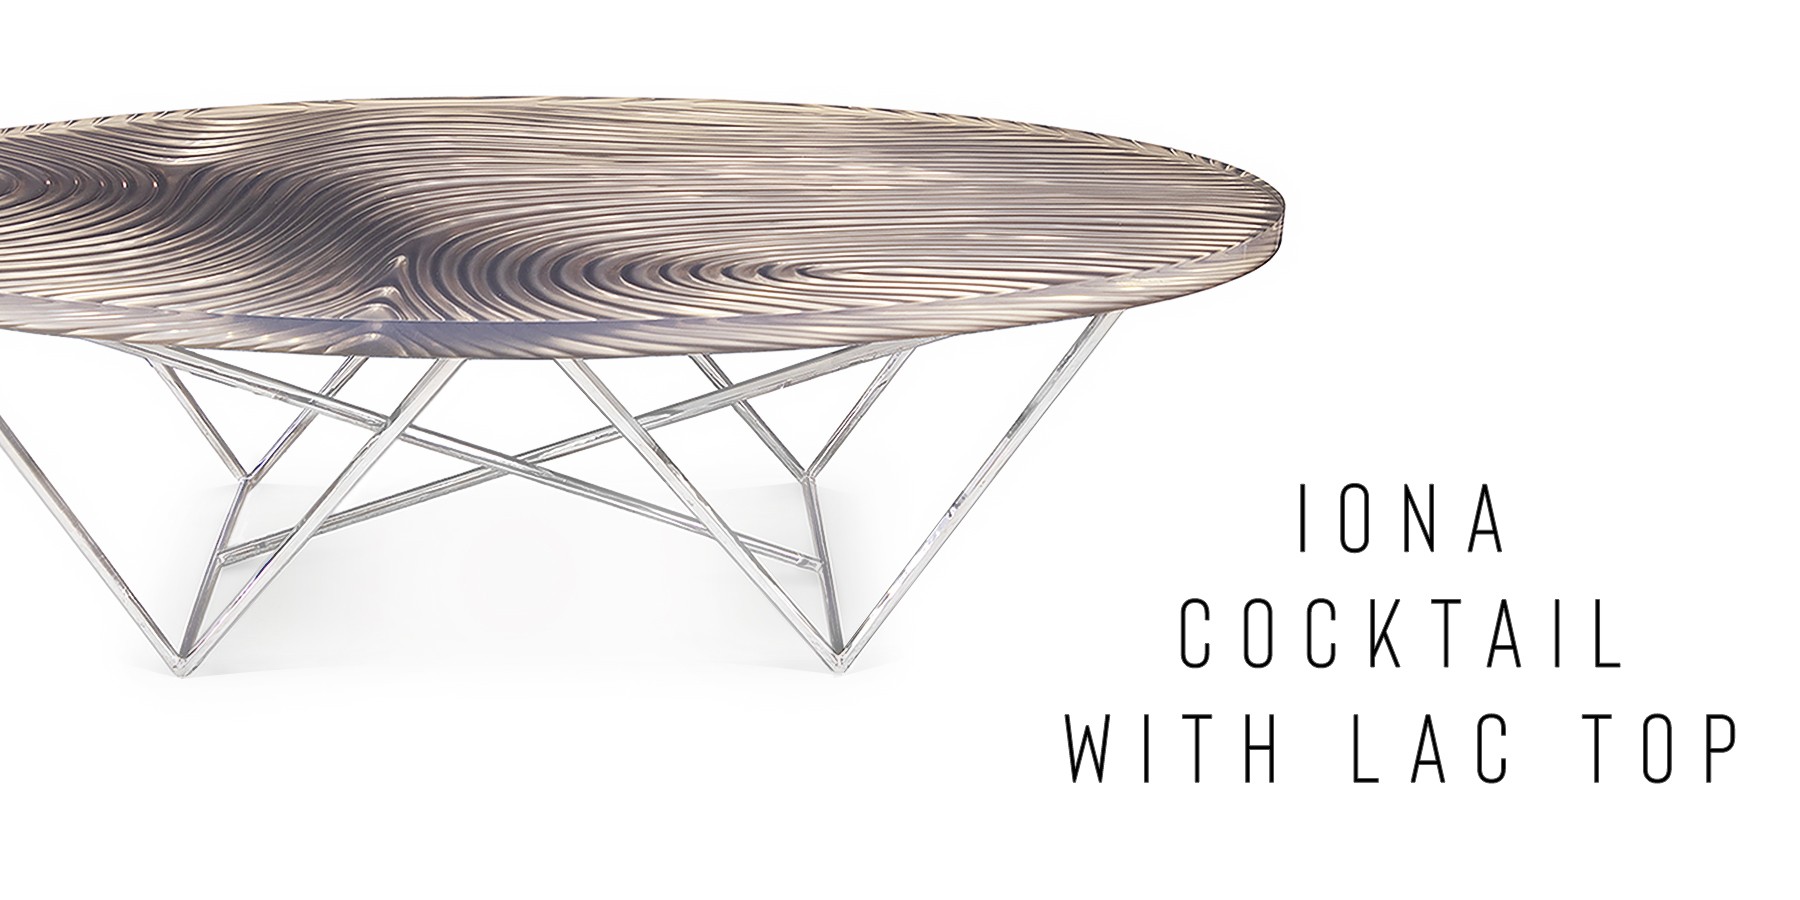 Iona Cocktail table with lac top